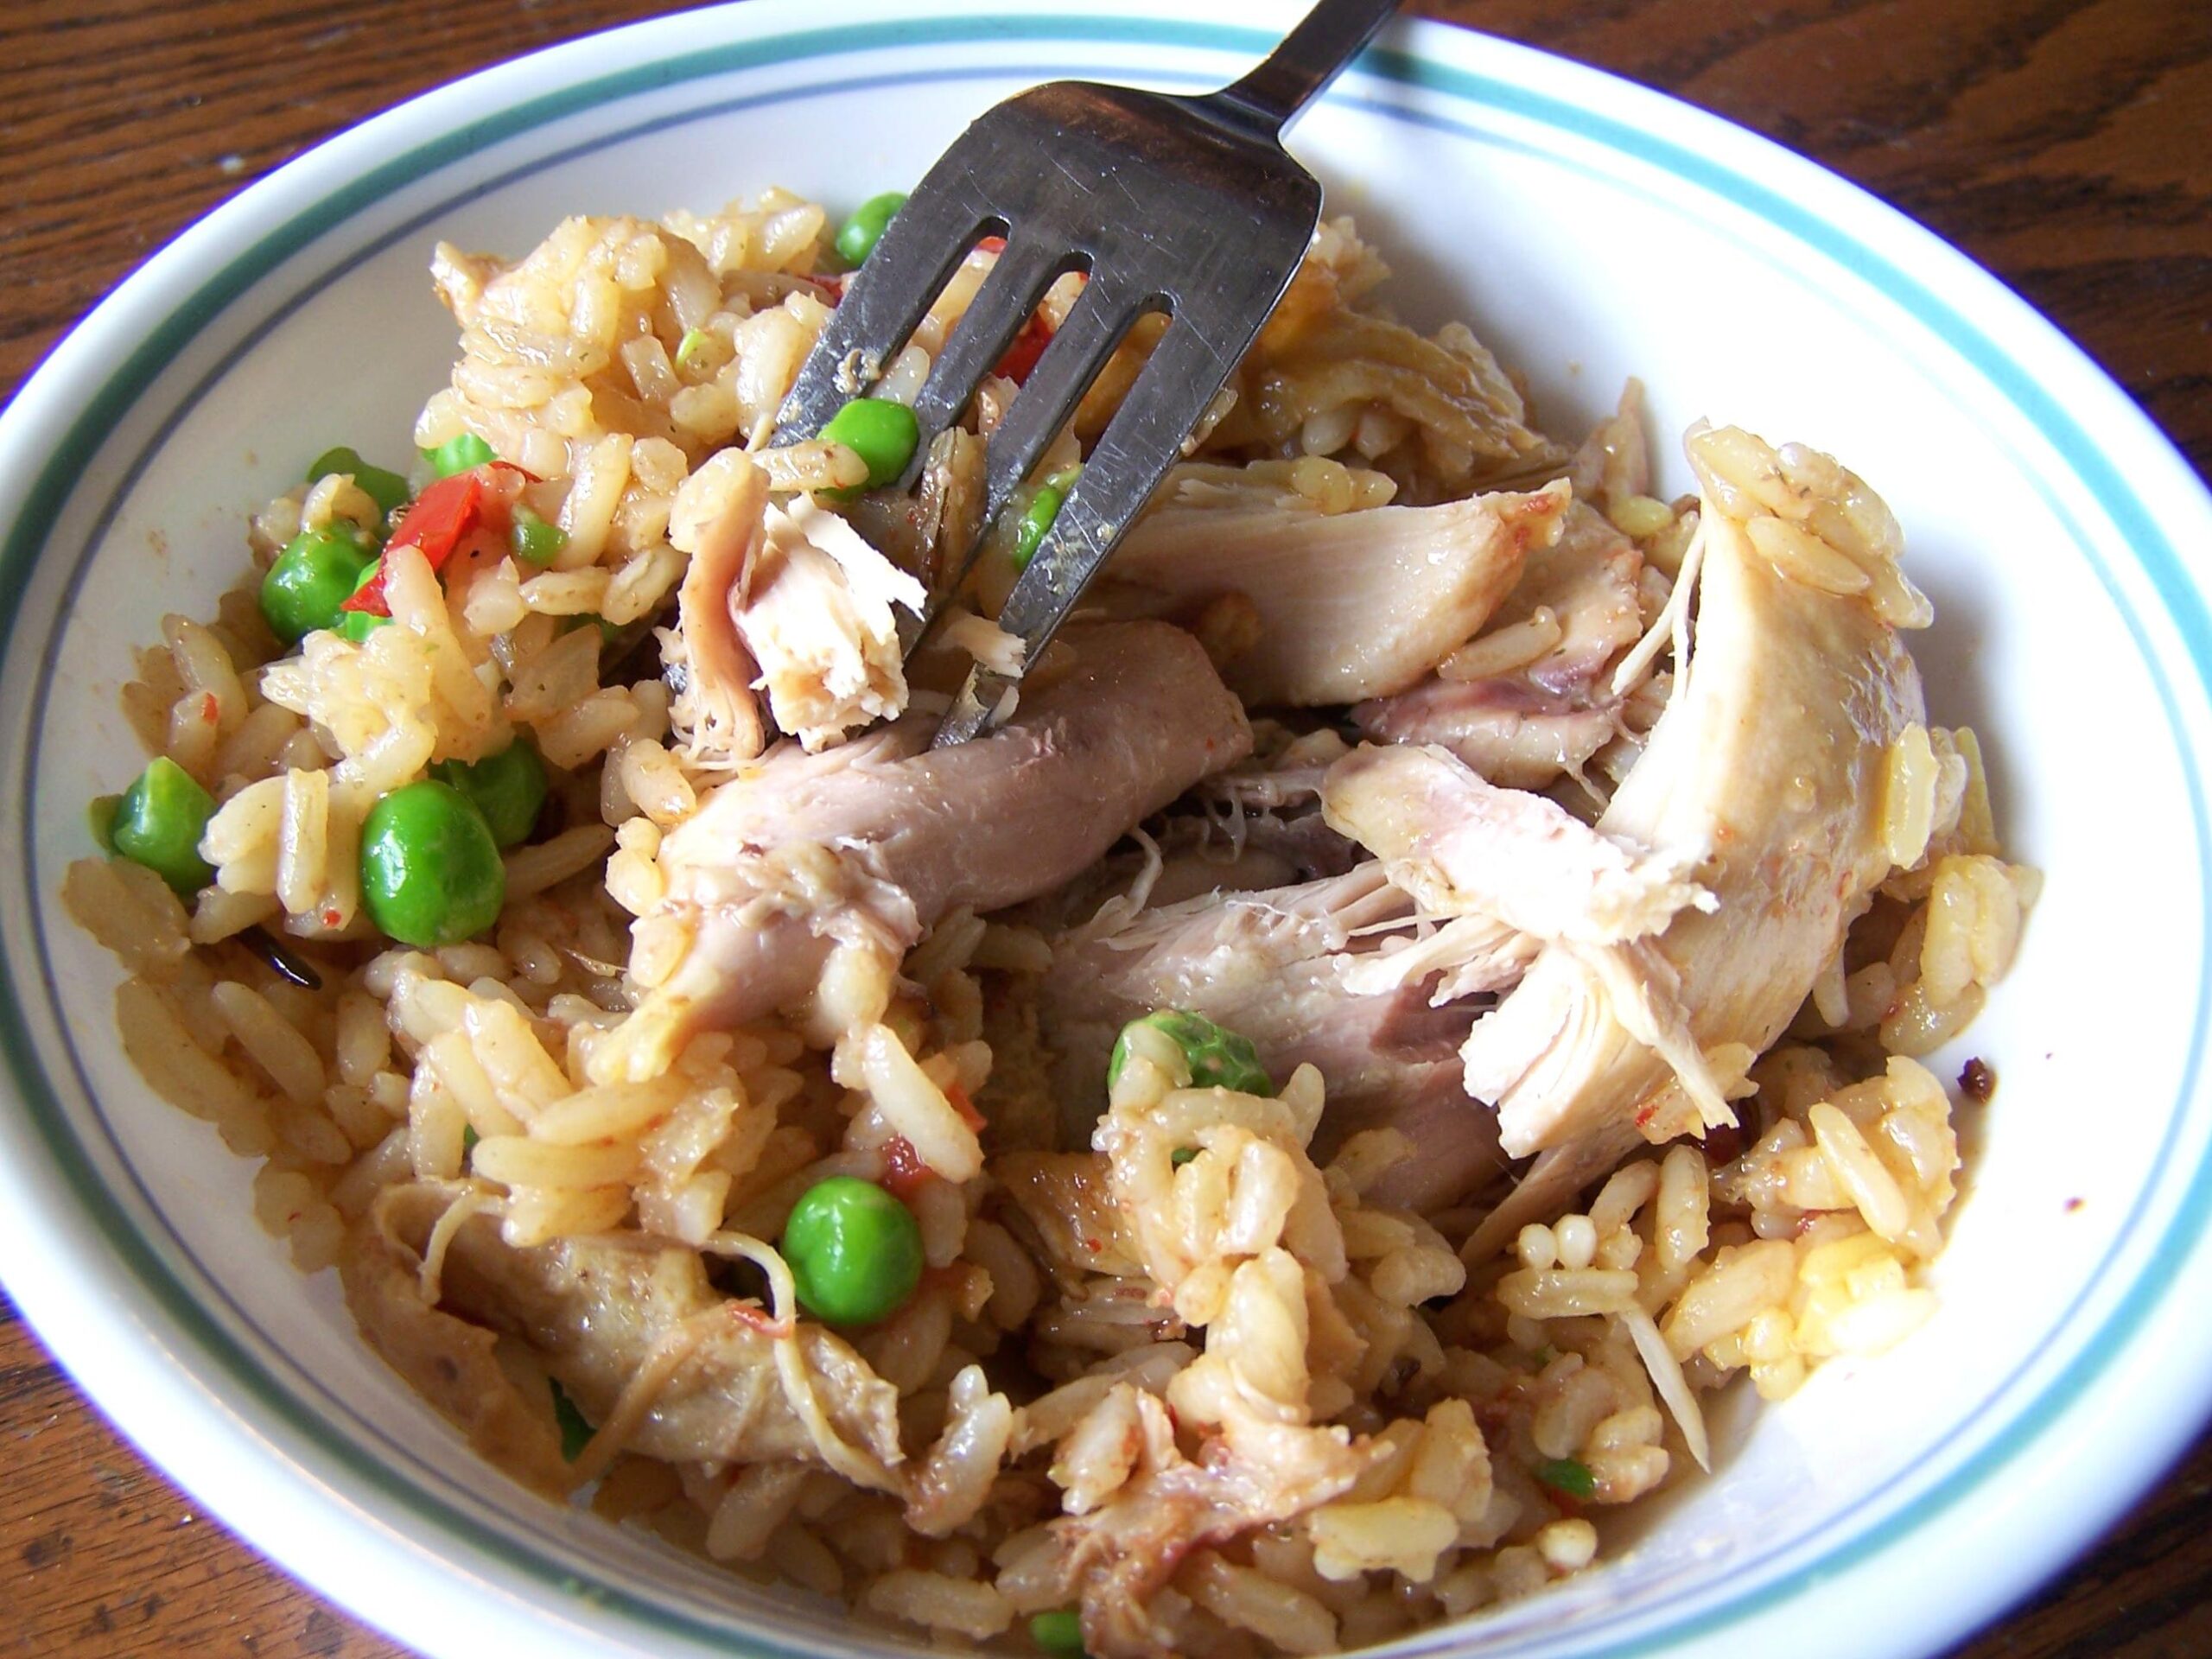  Enjoy a taste of Brazil with this Slow Cooker Arroz Con Pollo!